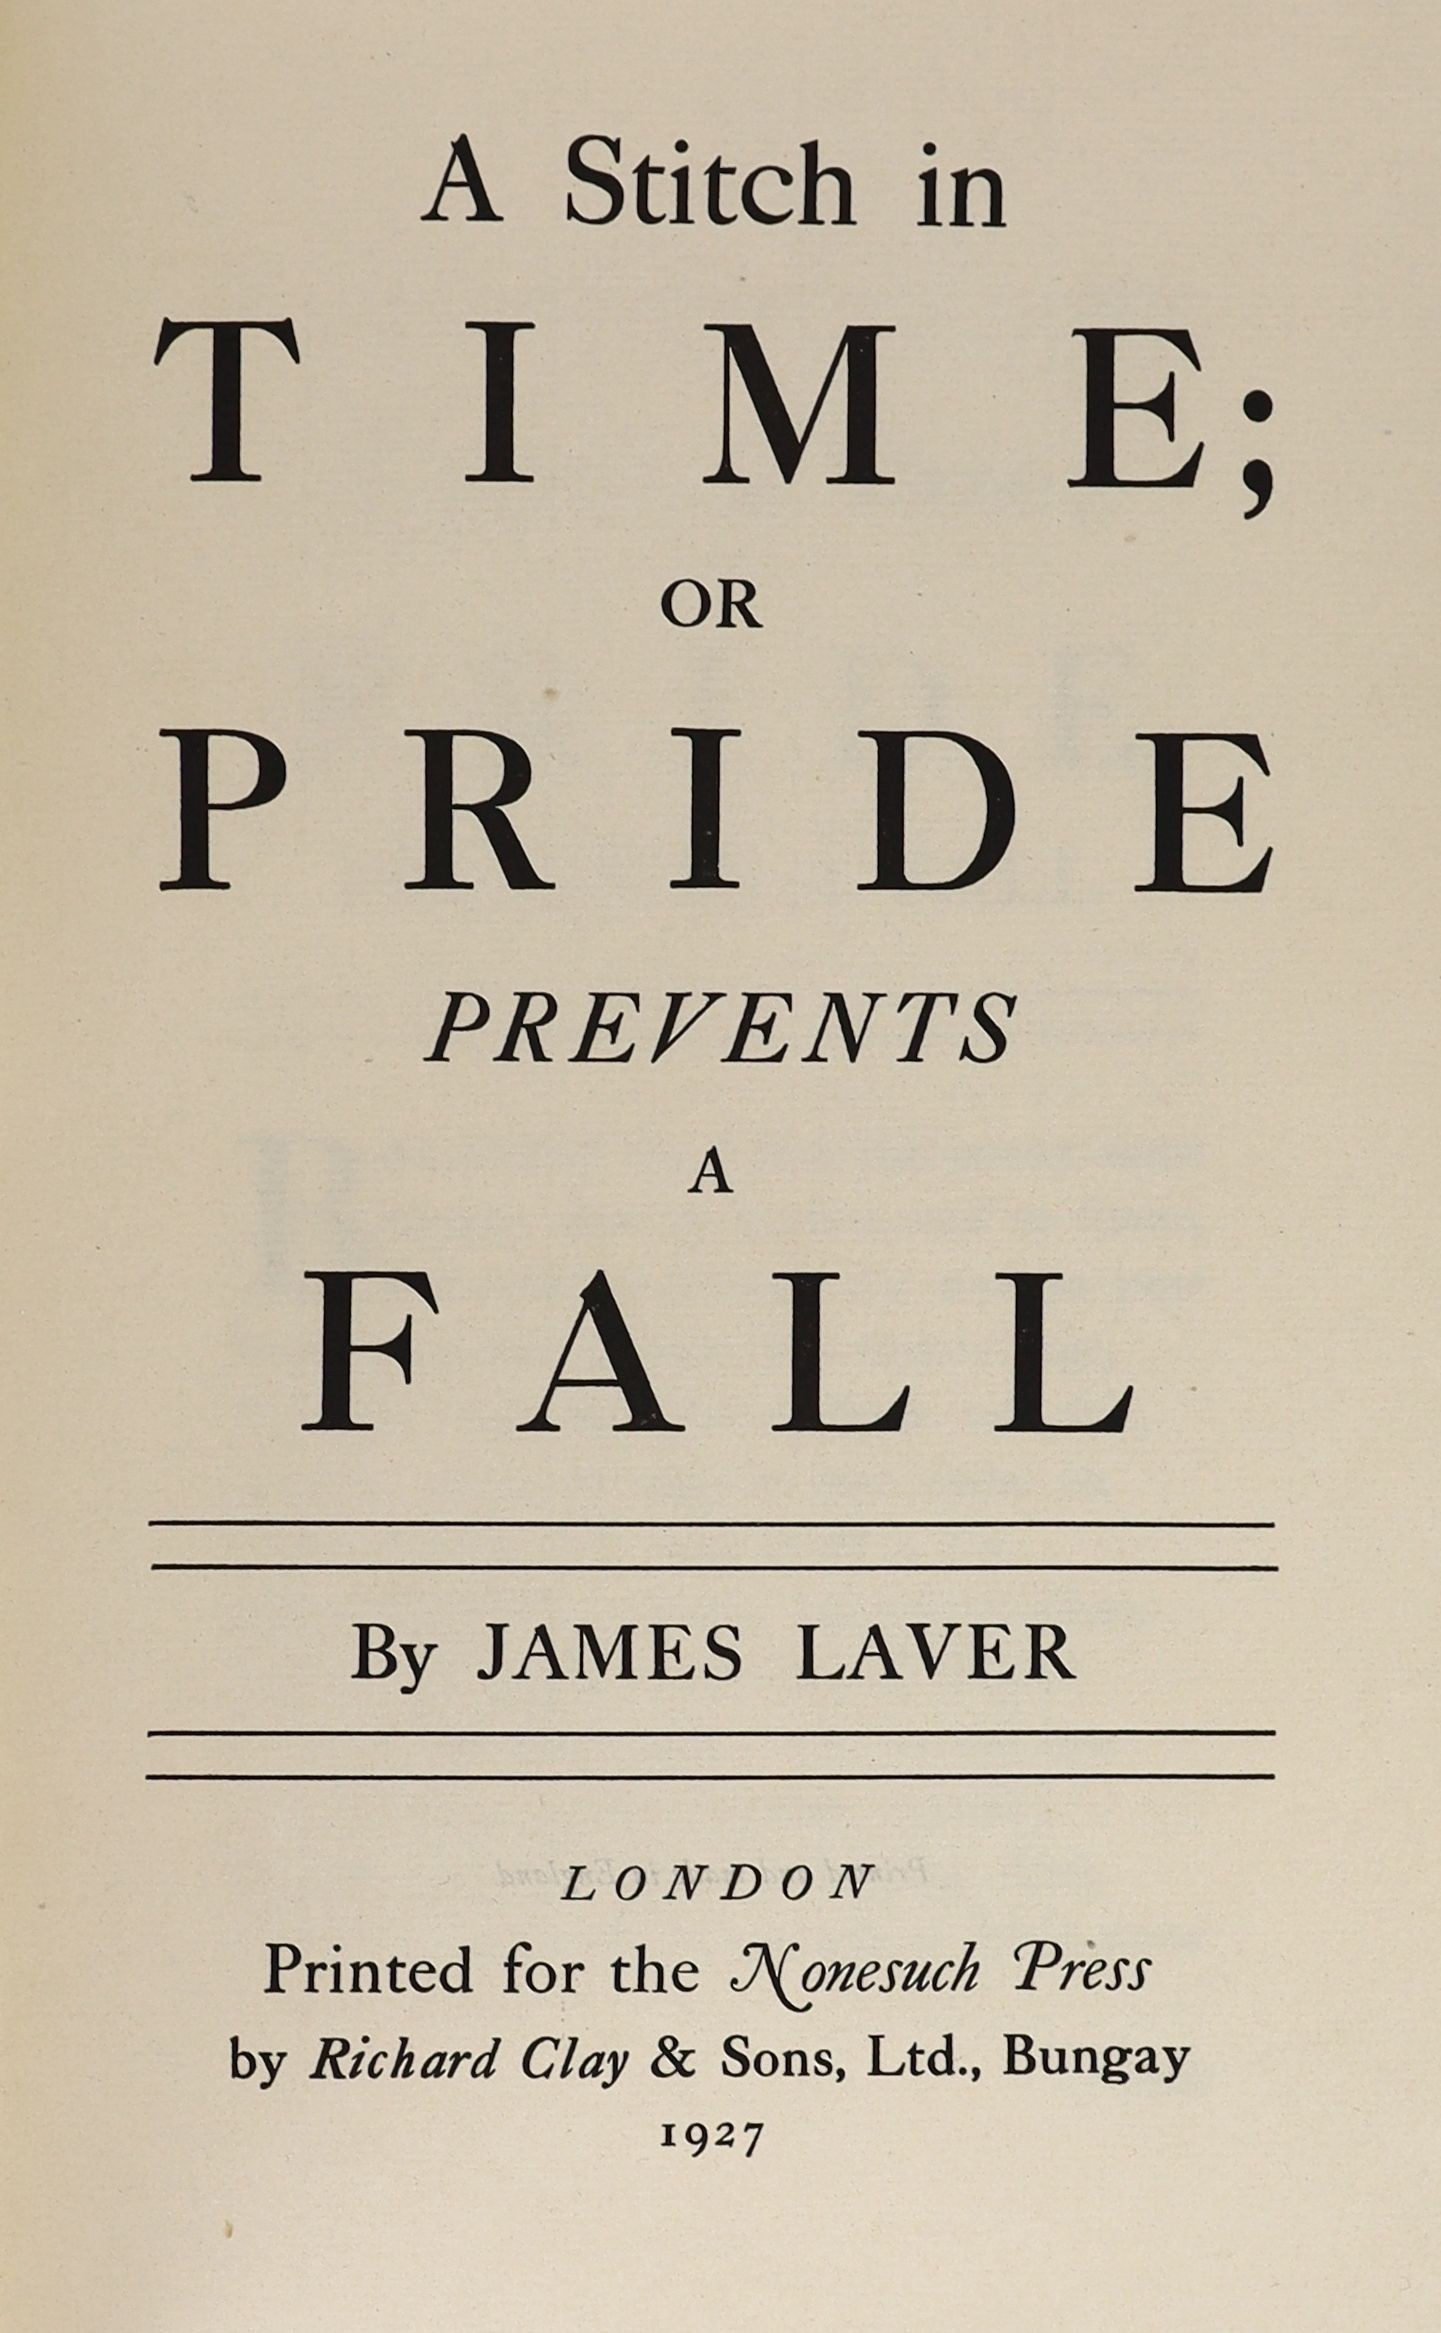 Nonesuch Press - 3 works - Wilson, Romer -- Latterday Symphony, 1st edition, 1927; Laver, James - 2 works, Love’s Progress, one of 1525, 1929 and A Stitch in Time; or Pride Prevents a Fall, 1927